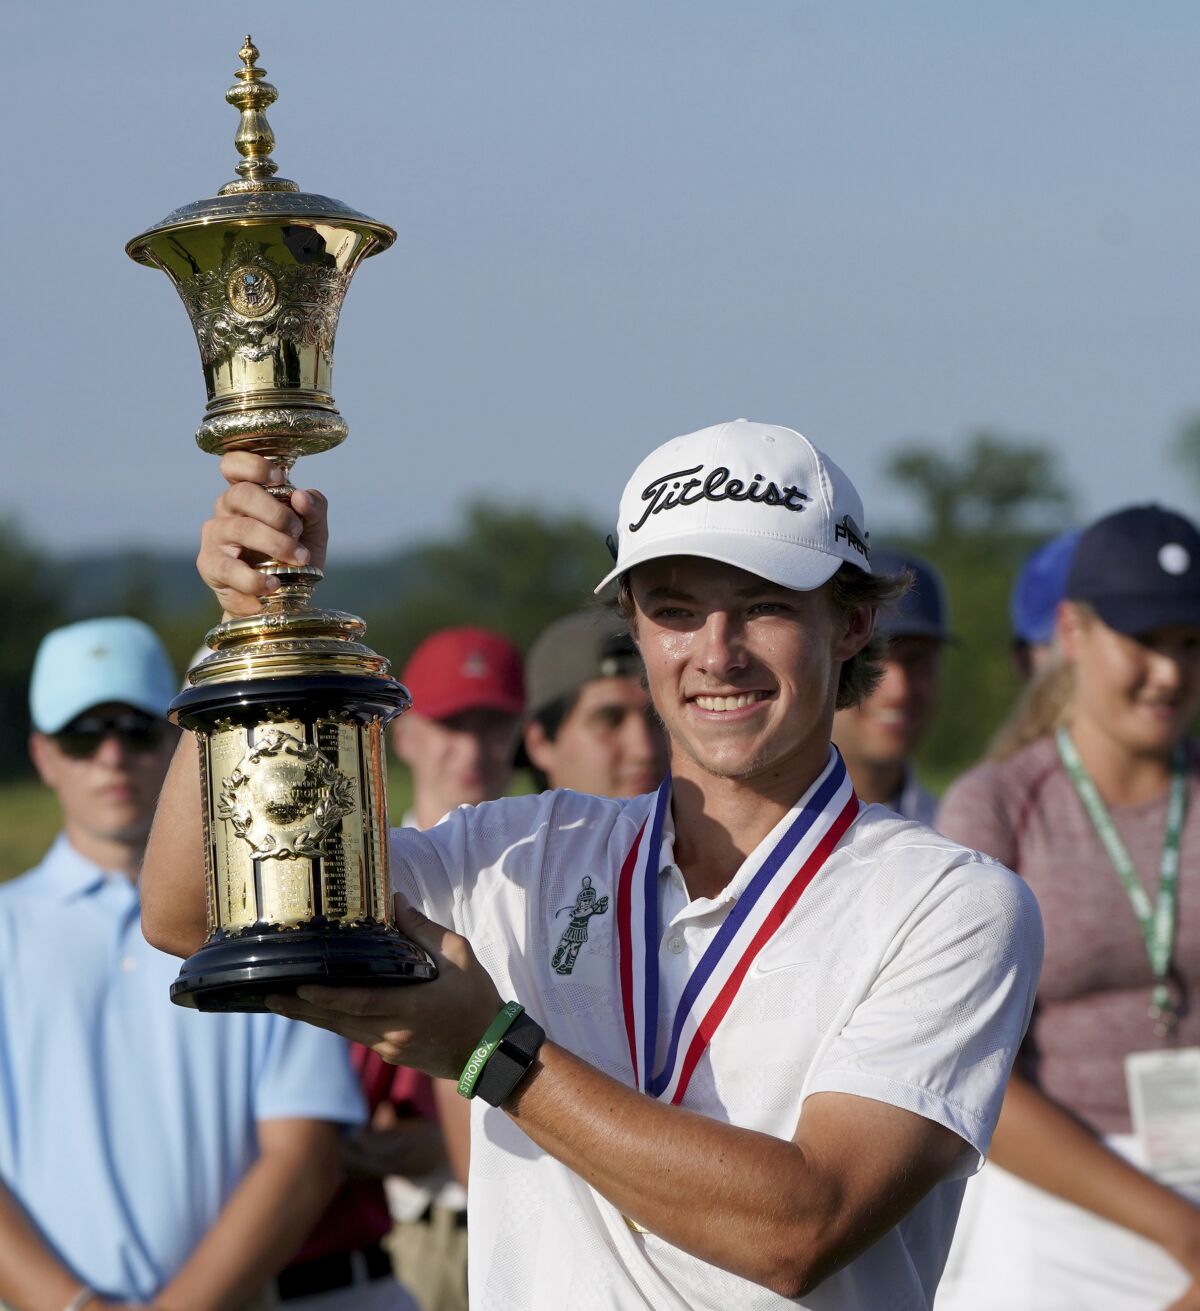 James Piot lifts the trophy after defeating Austin Greaser on the 17th hole to win the U.S. Amateur Championship golf tournament Sunday, Aug. 15, 2021, at Oakmont Country Club in Oakmont, Pa. (Matt Freed/Pittsburgh Post-Gazette via AP)